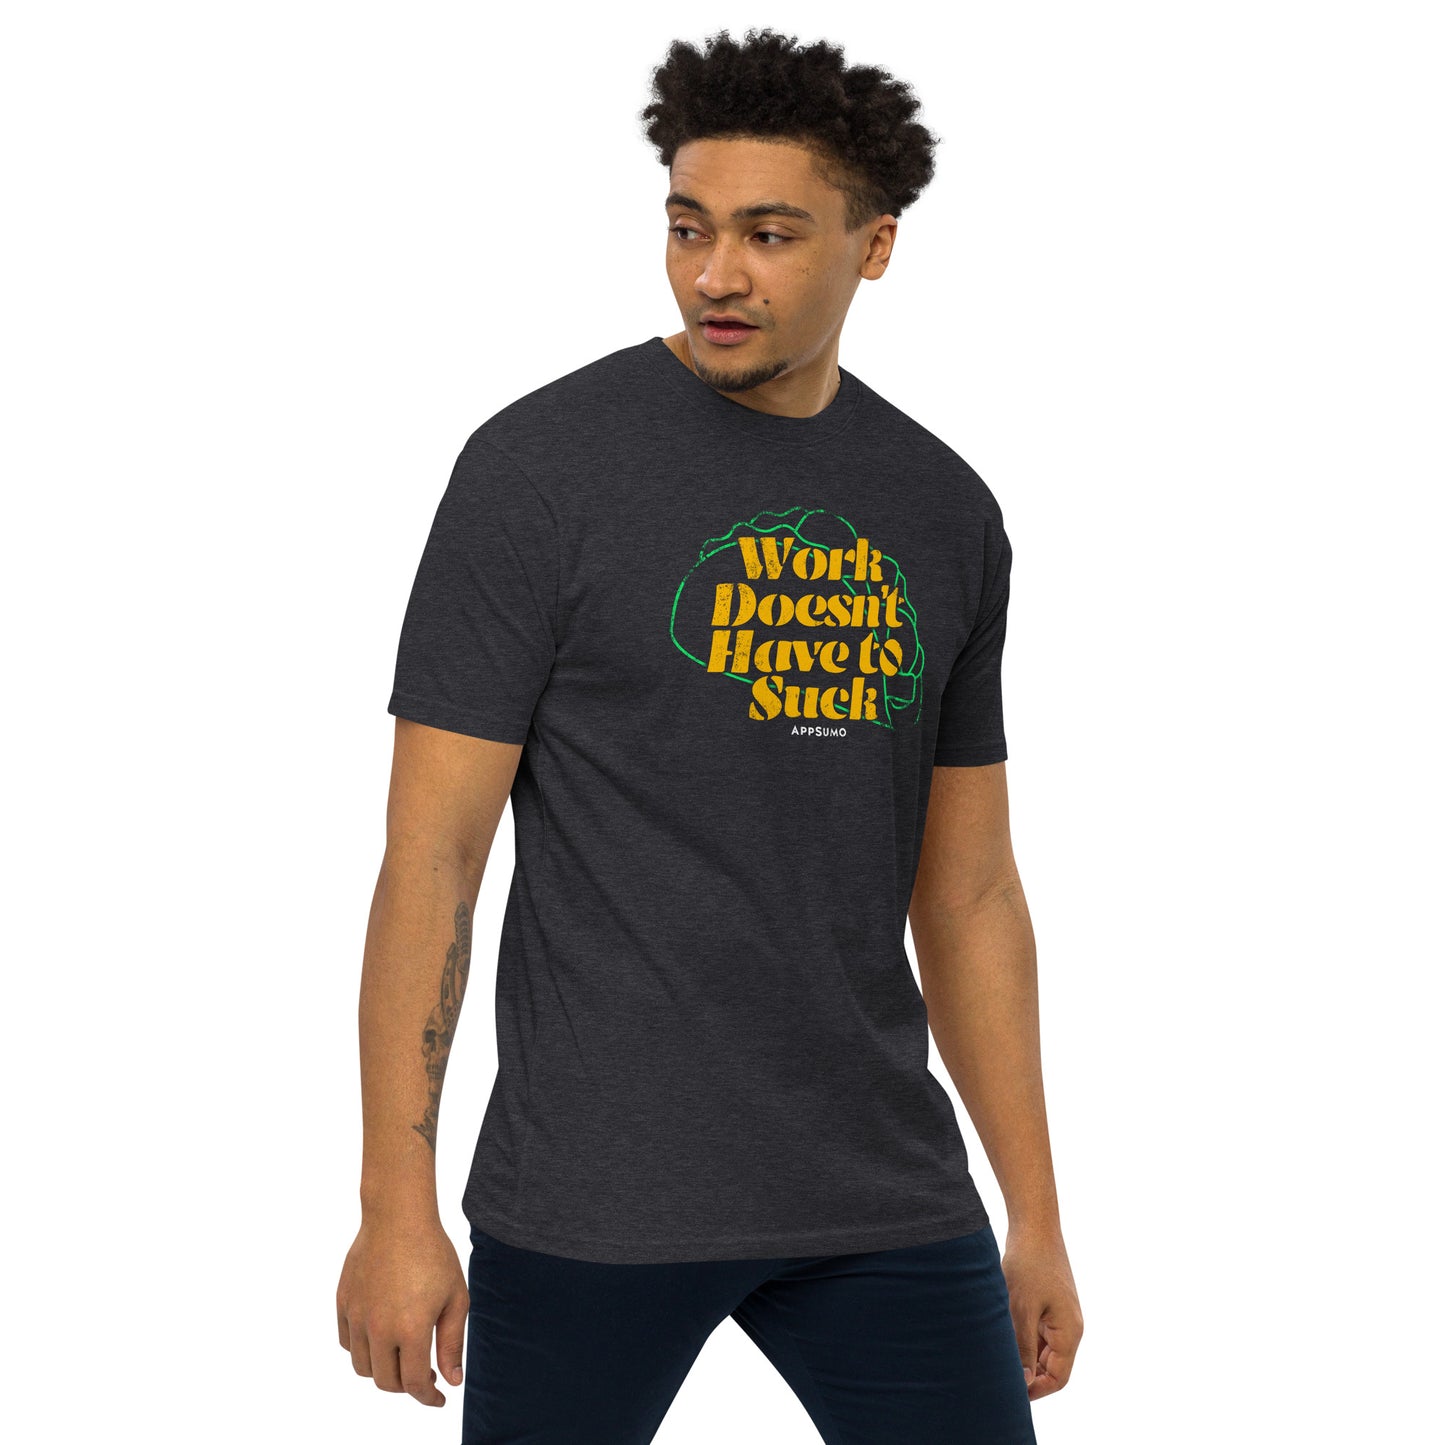 Work Doesn't Have to Suck - Premium heavyweight tee